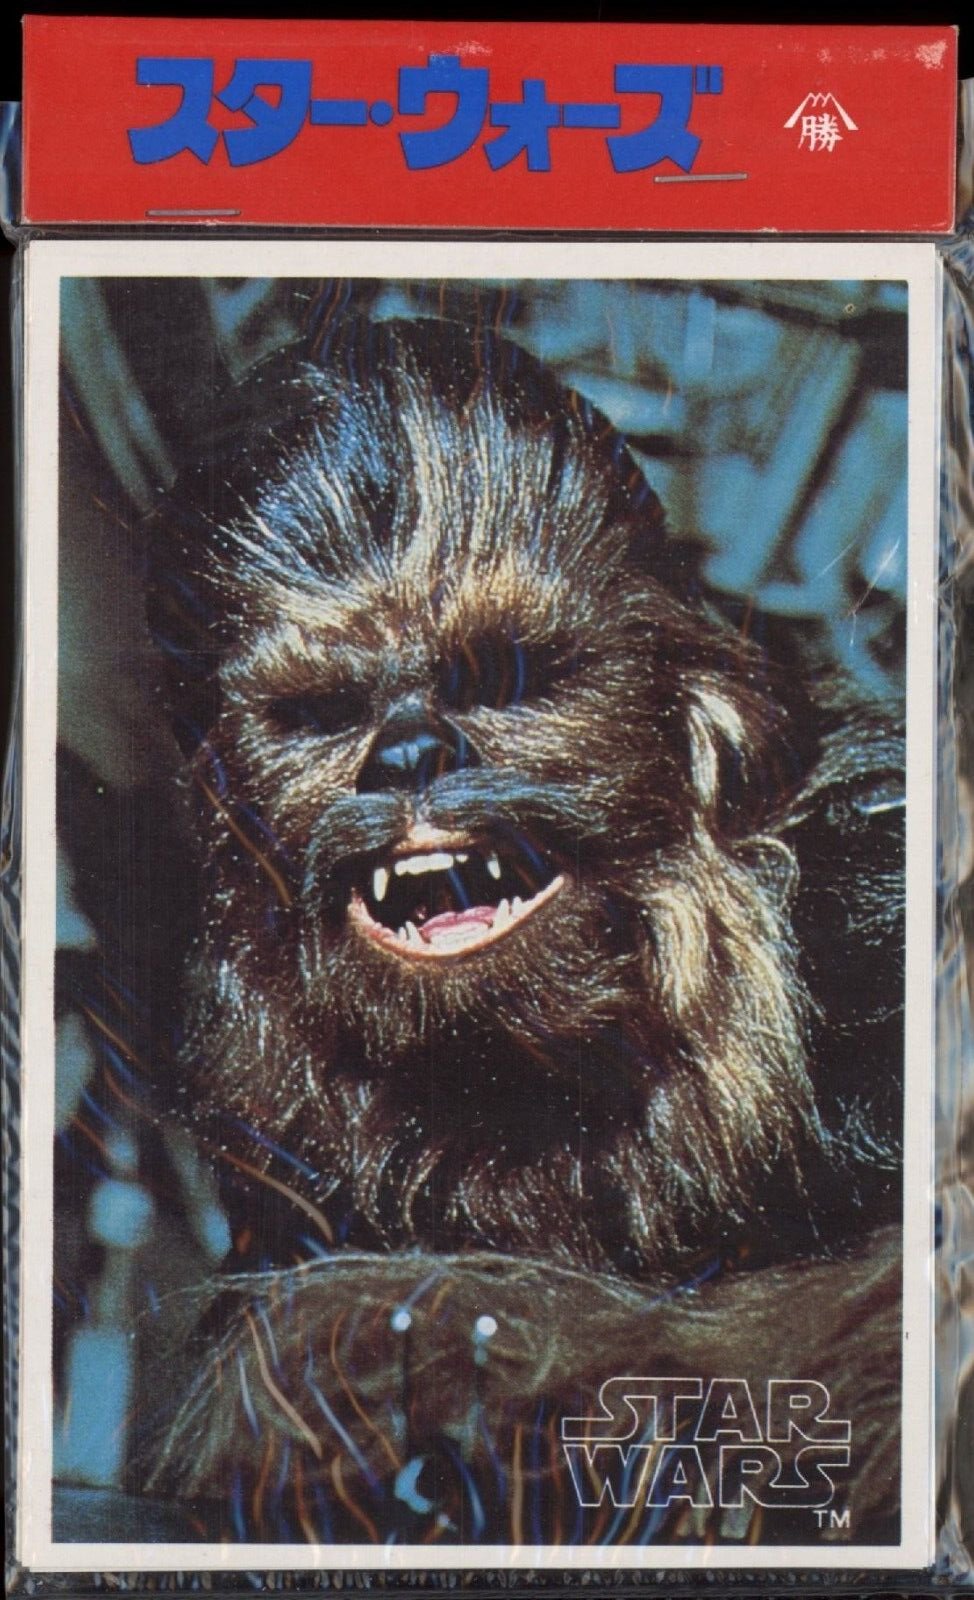 CHEWBACCA 1977 Star Wars Japan Topps Yamakatsu Large Sealed Pack of 4 Cards Star Wars Sealed Pack - Hobby Gems